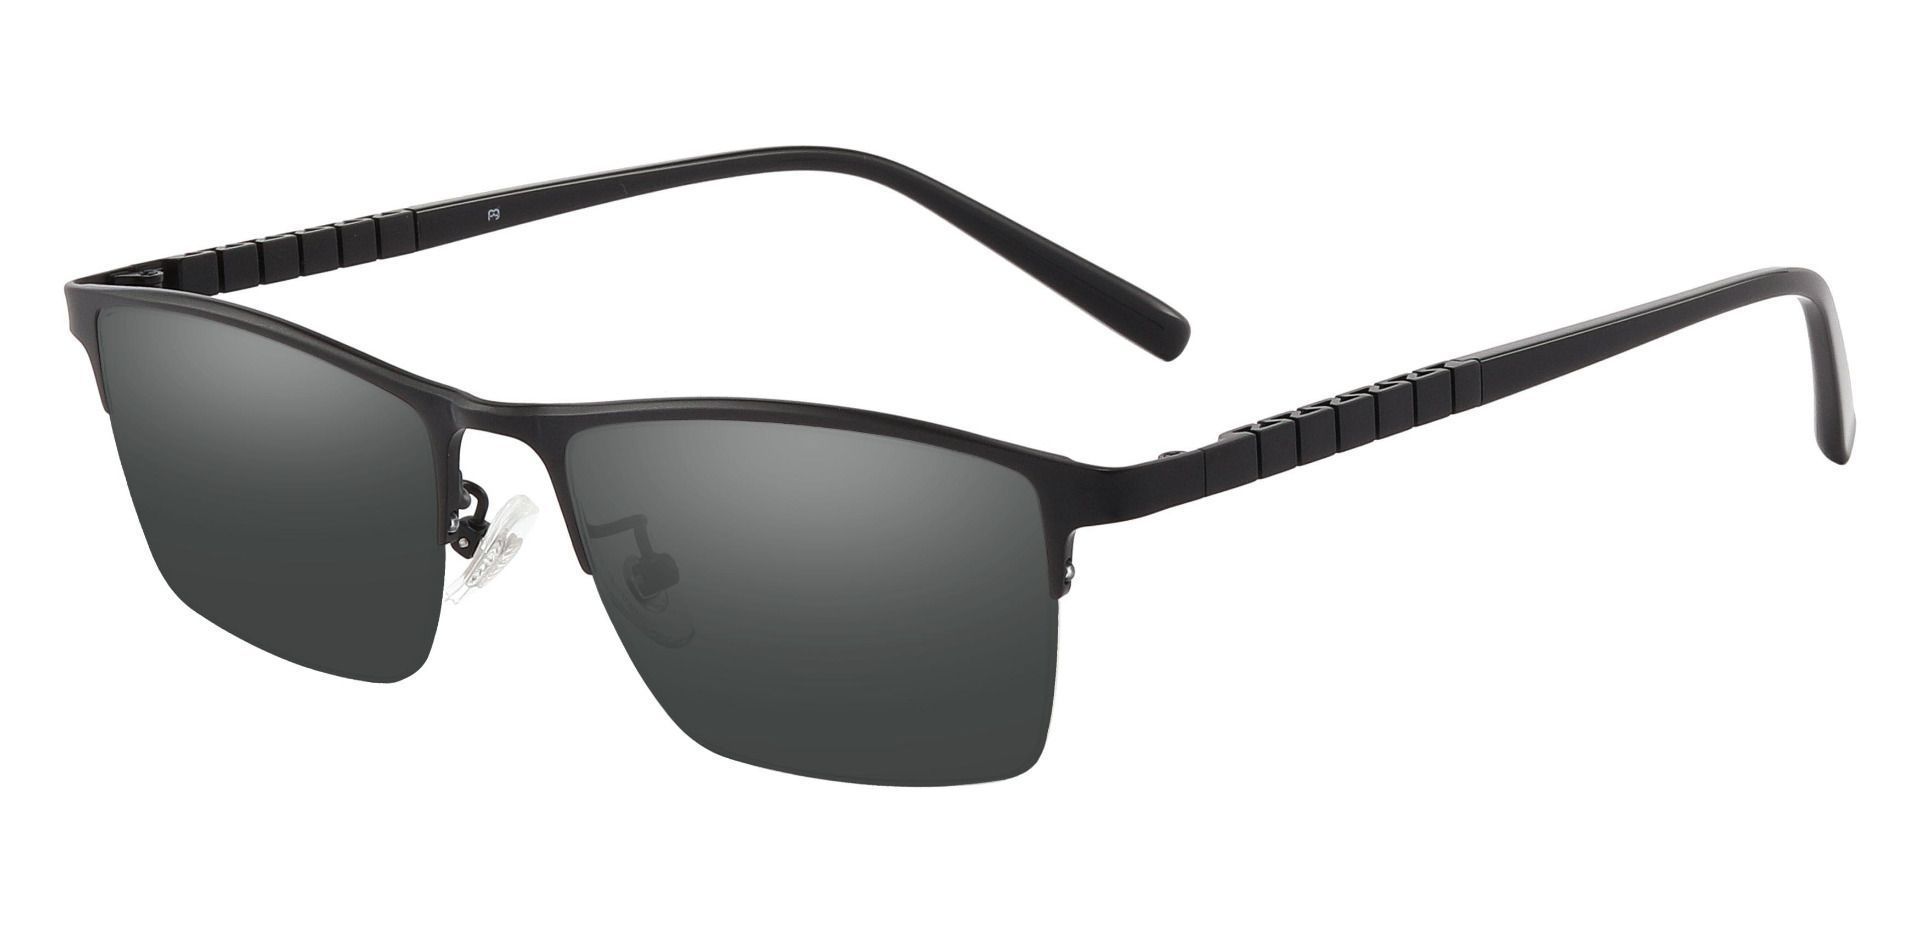 Maine Rectangle Non-Rx Sunglasses - Black Frame With Gray Lenses